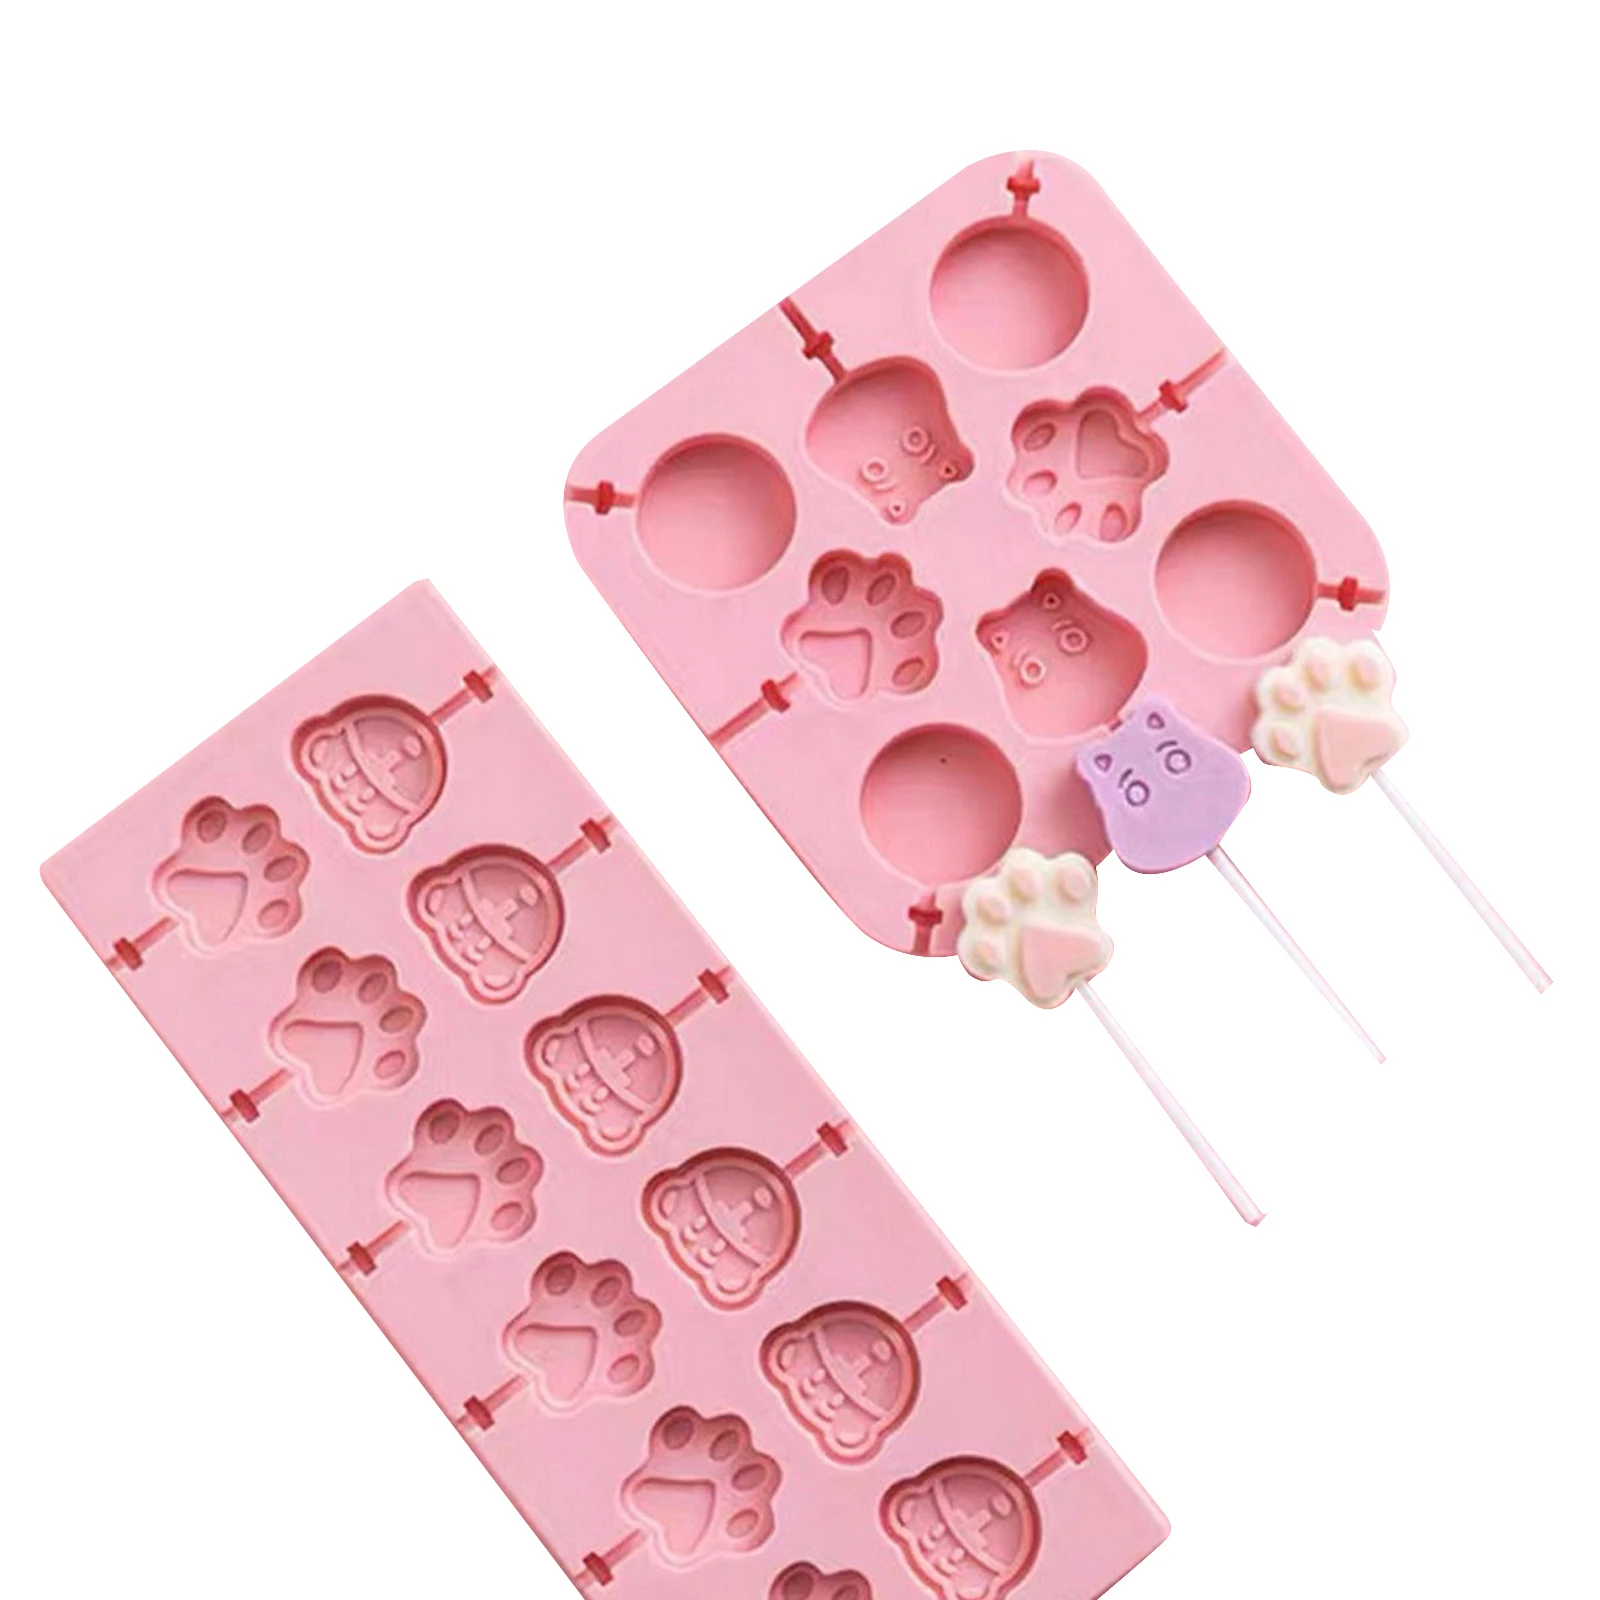 

Silicone Lollipop Molds Chocolate And Candy Molds Cake Mold DIY Variety Shapes Cake Pastry Decorating Form Silicone Bakeware